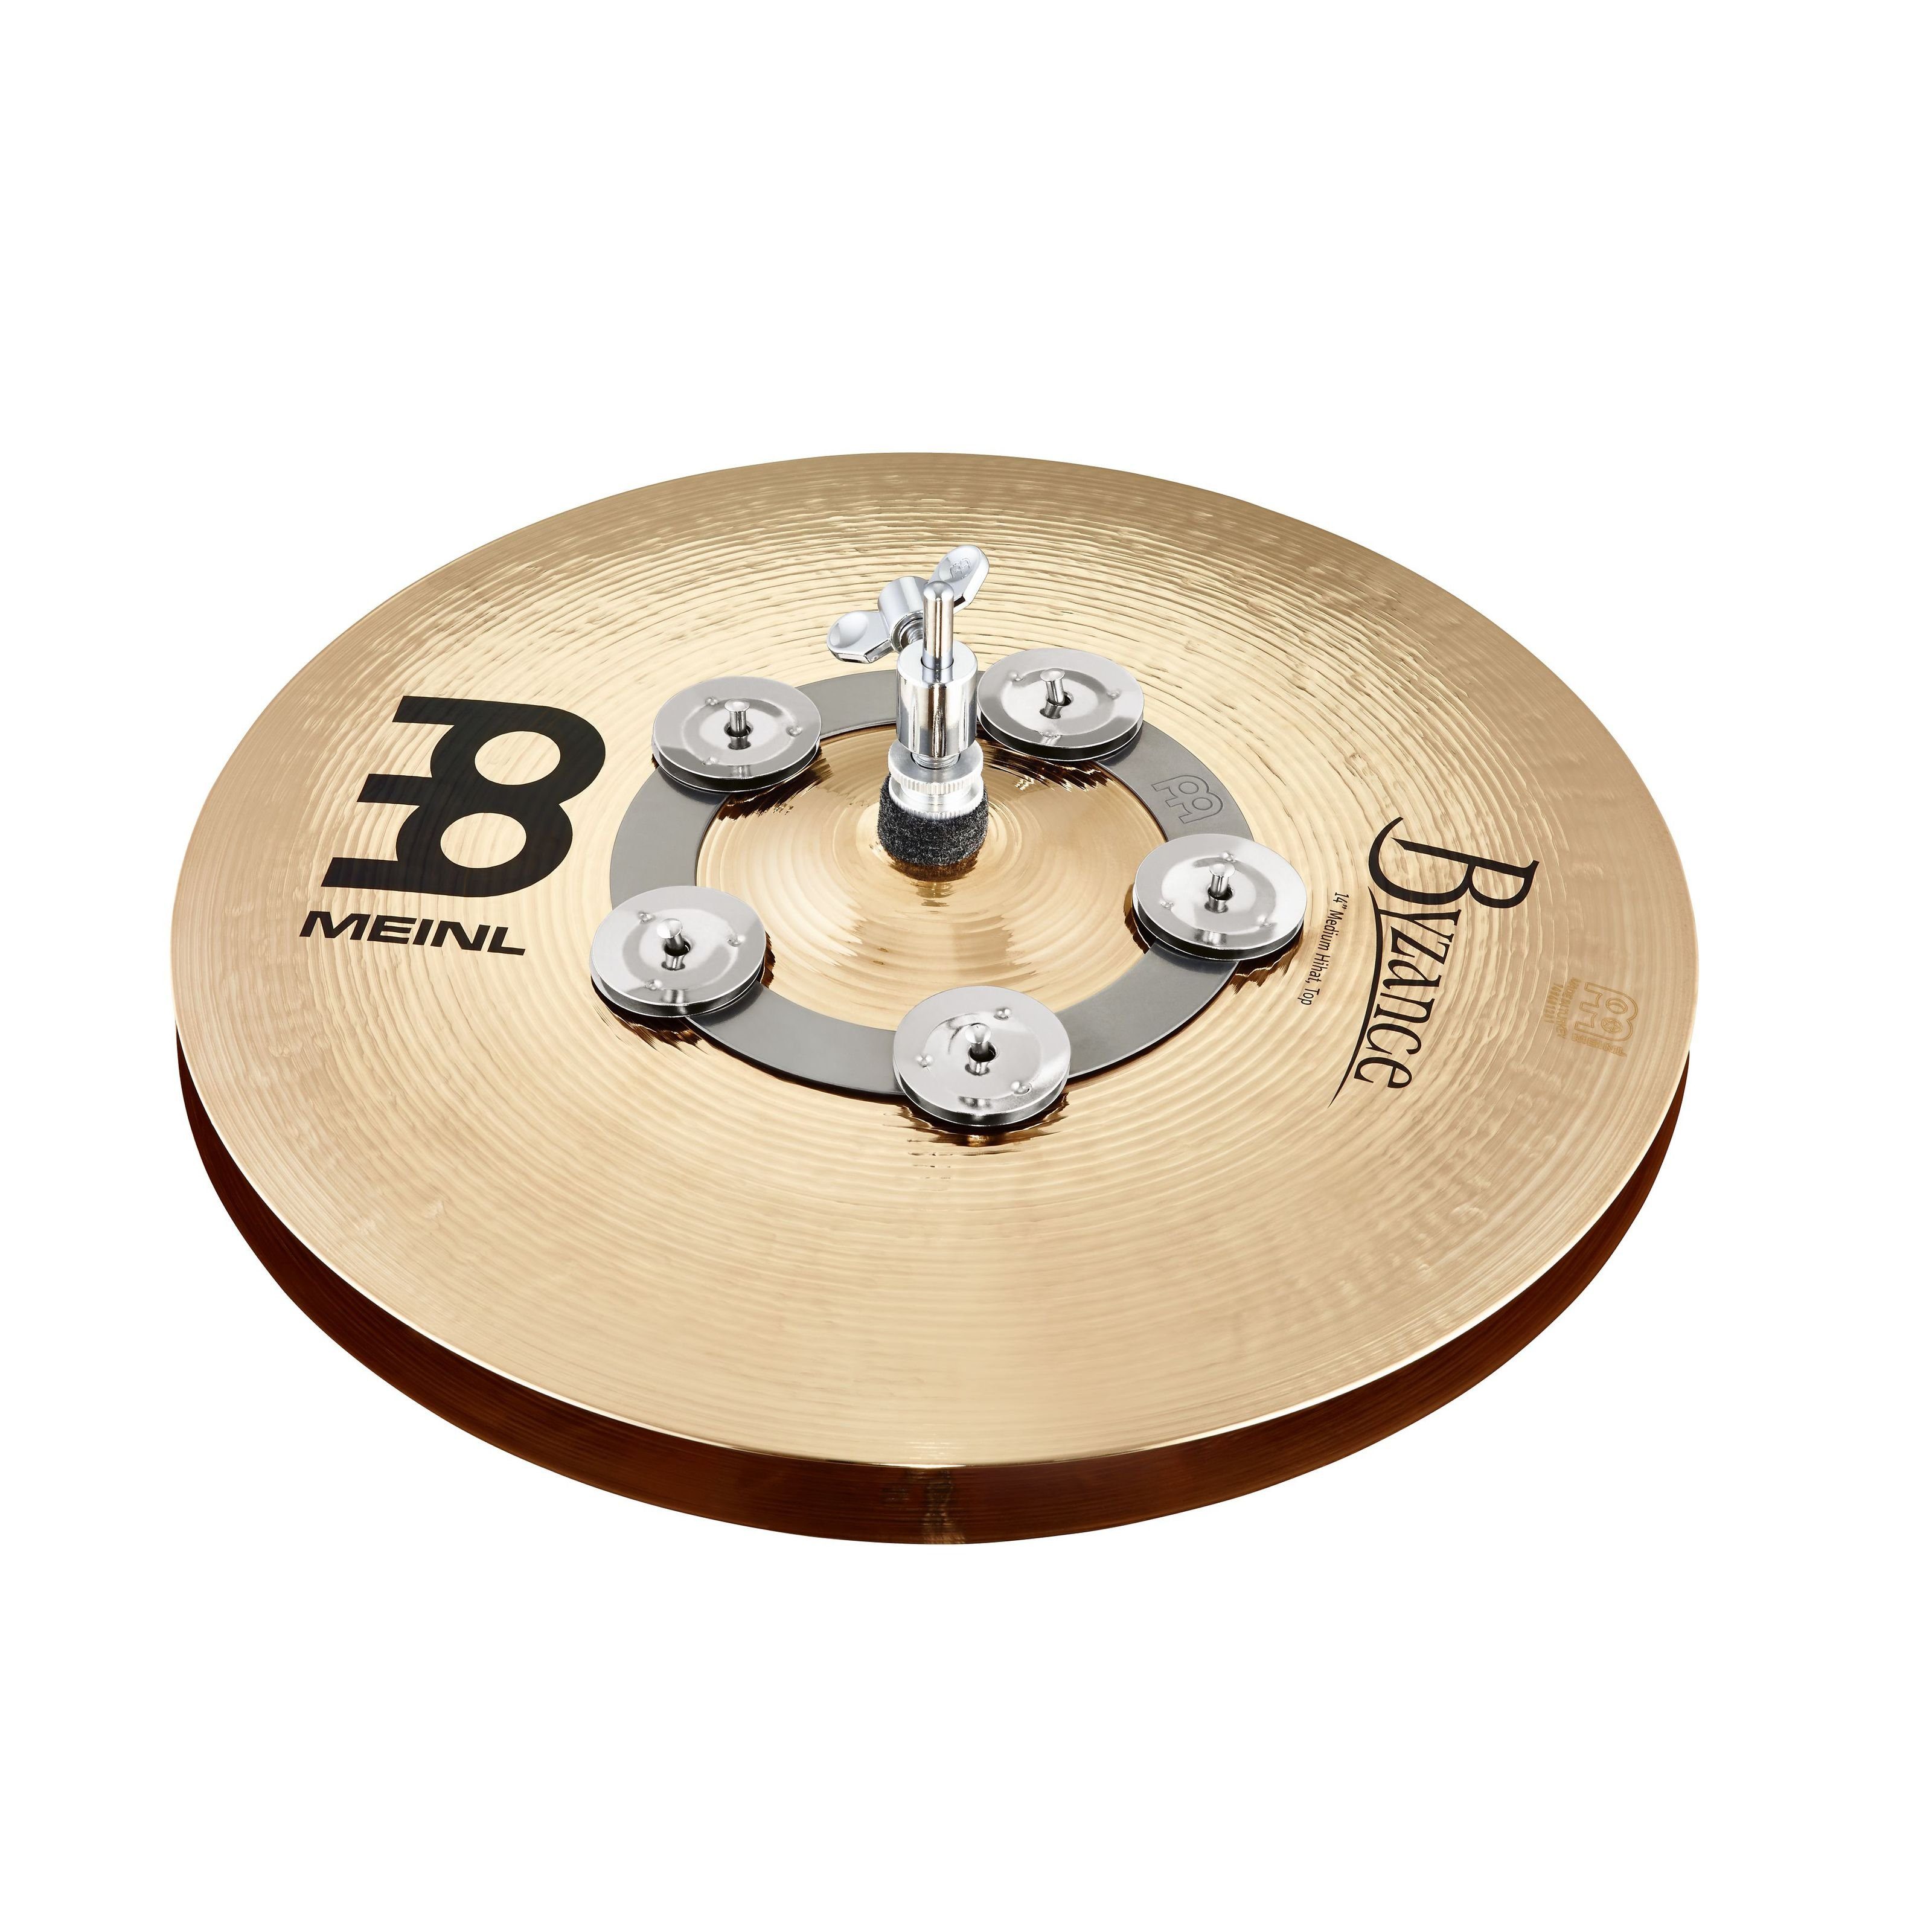 Percussion Ring Spielzeug-Musikinstrument, CRING, Ching 6" Meinl - Tambourine